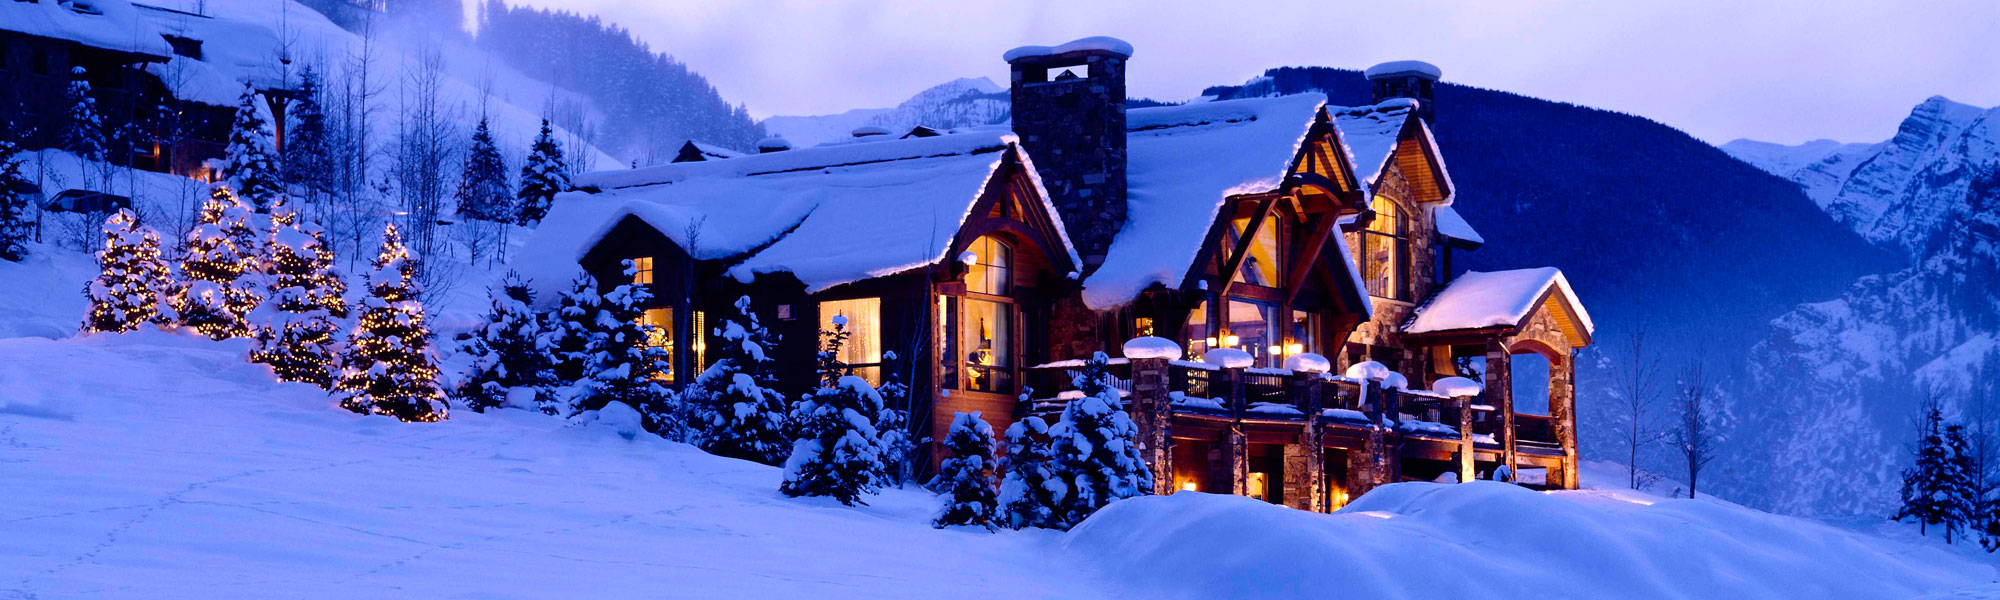 Snow Covered Home on the Mountain